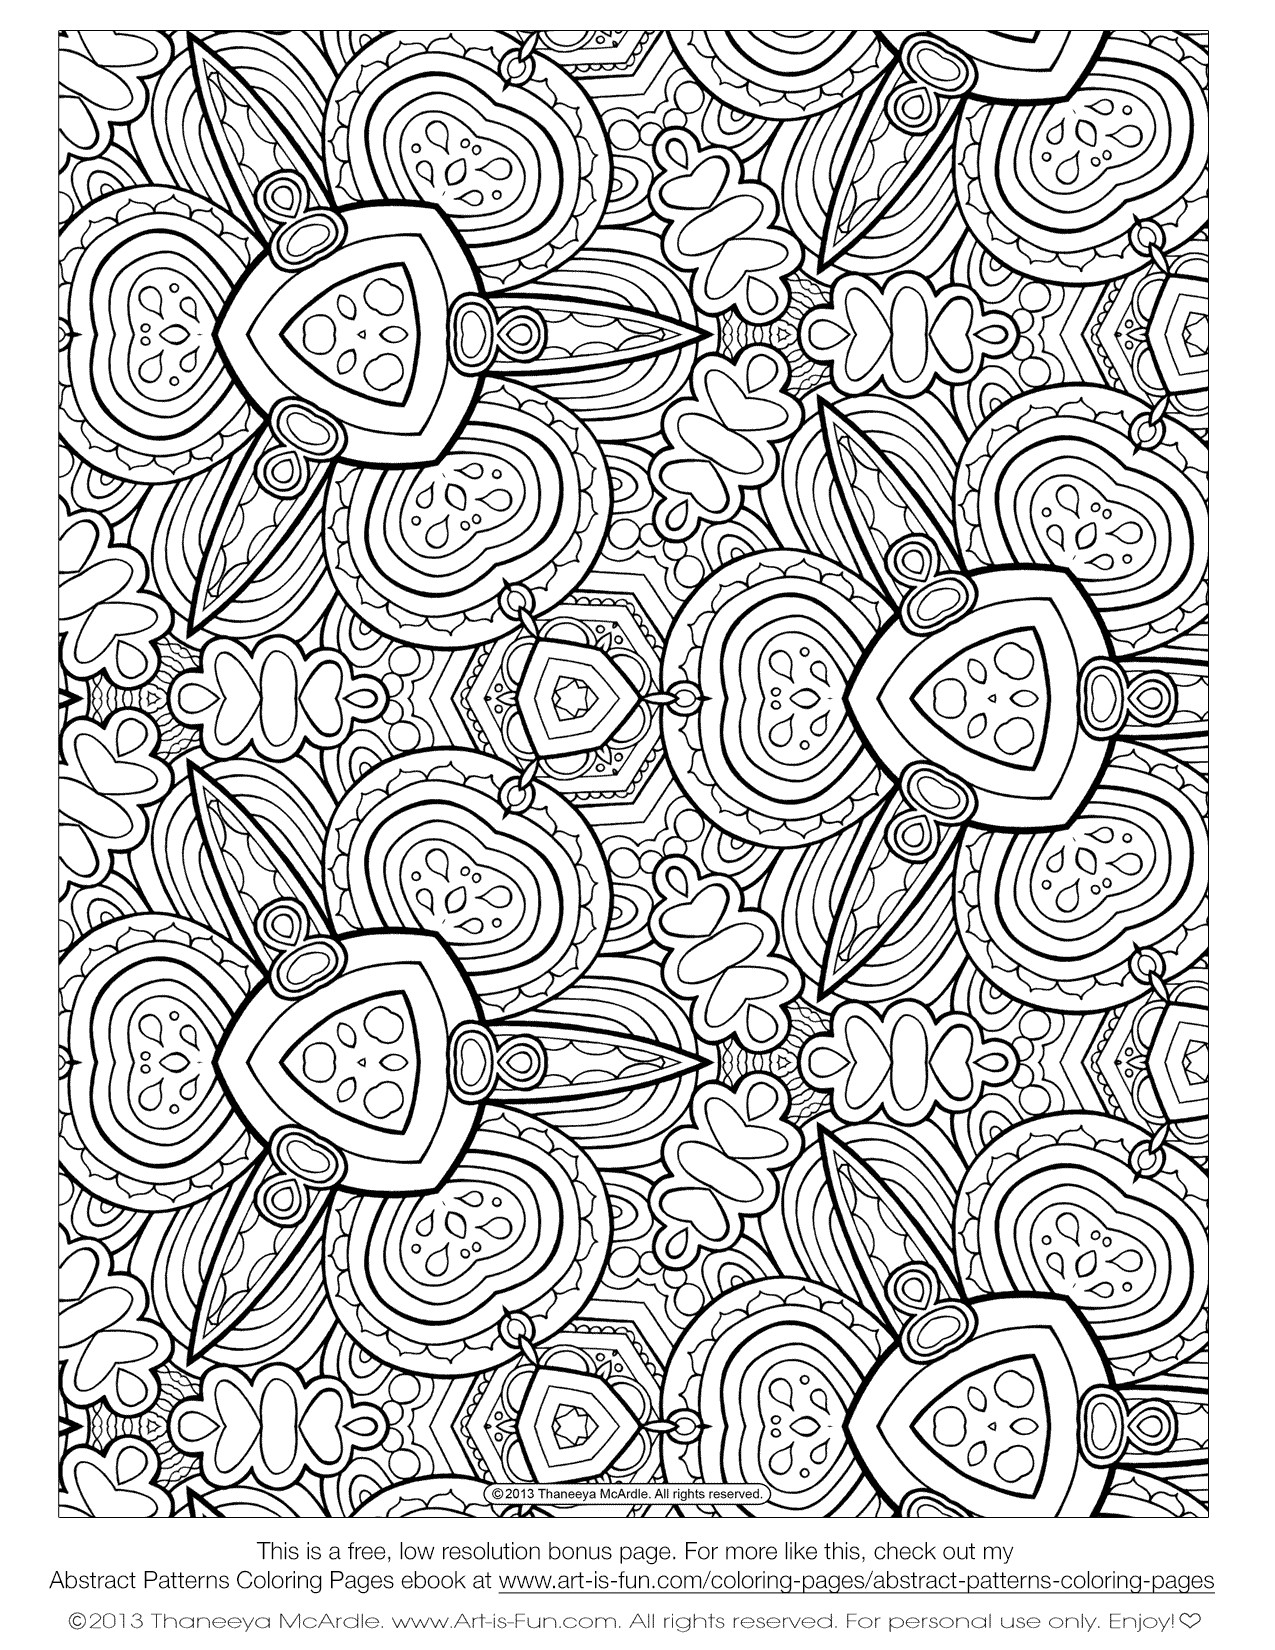 Road Trip Coloring Pages Abstract Coloring Pages Fun Time